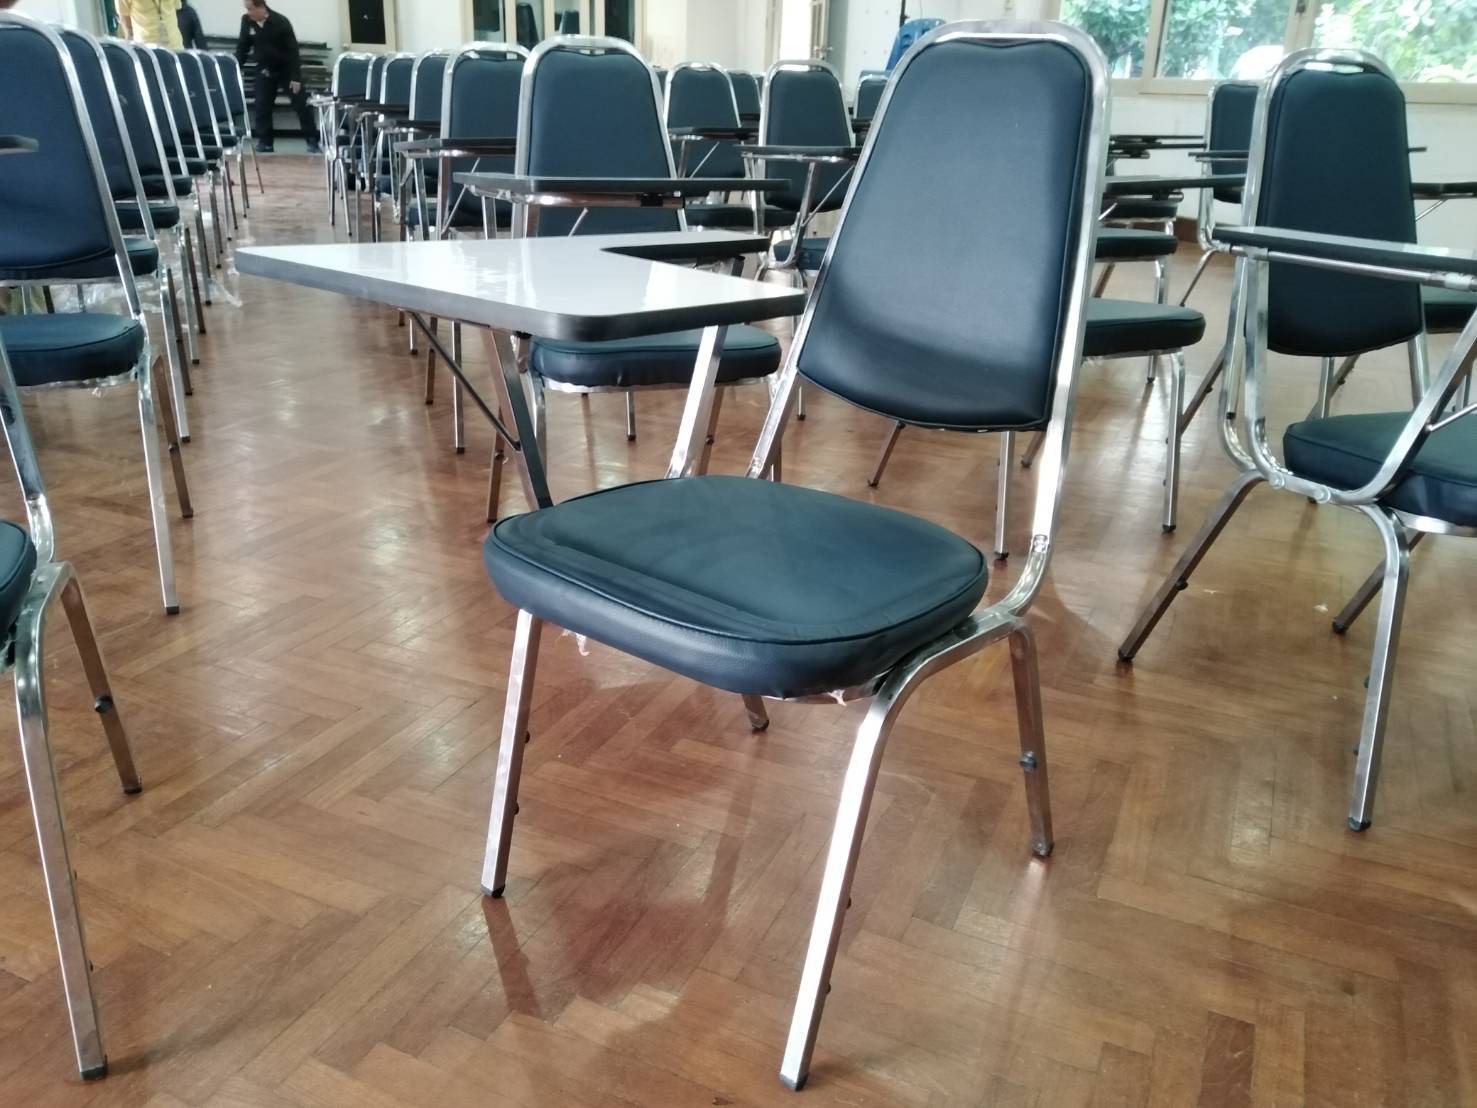 54036::MO-162::An elegant lecture hall chair with colored/chrome base. Dimension (WxDxH) cm : 45x40x90. Available in 4 colors: Blue, Brown, Black and Light Blue